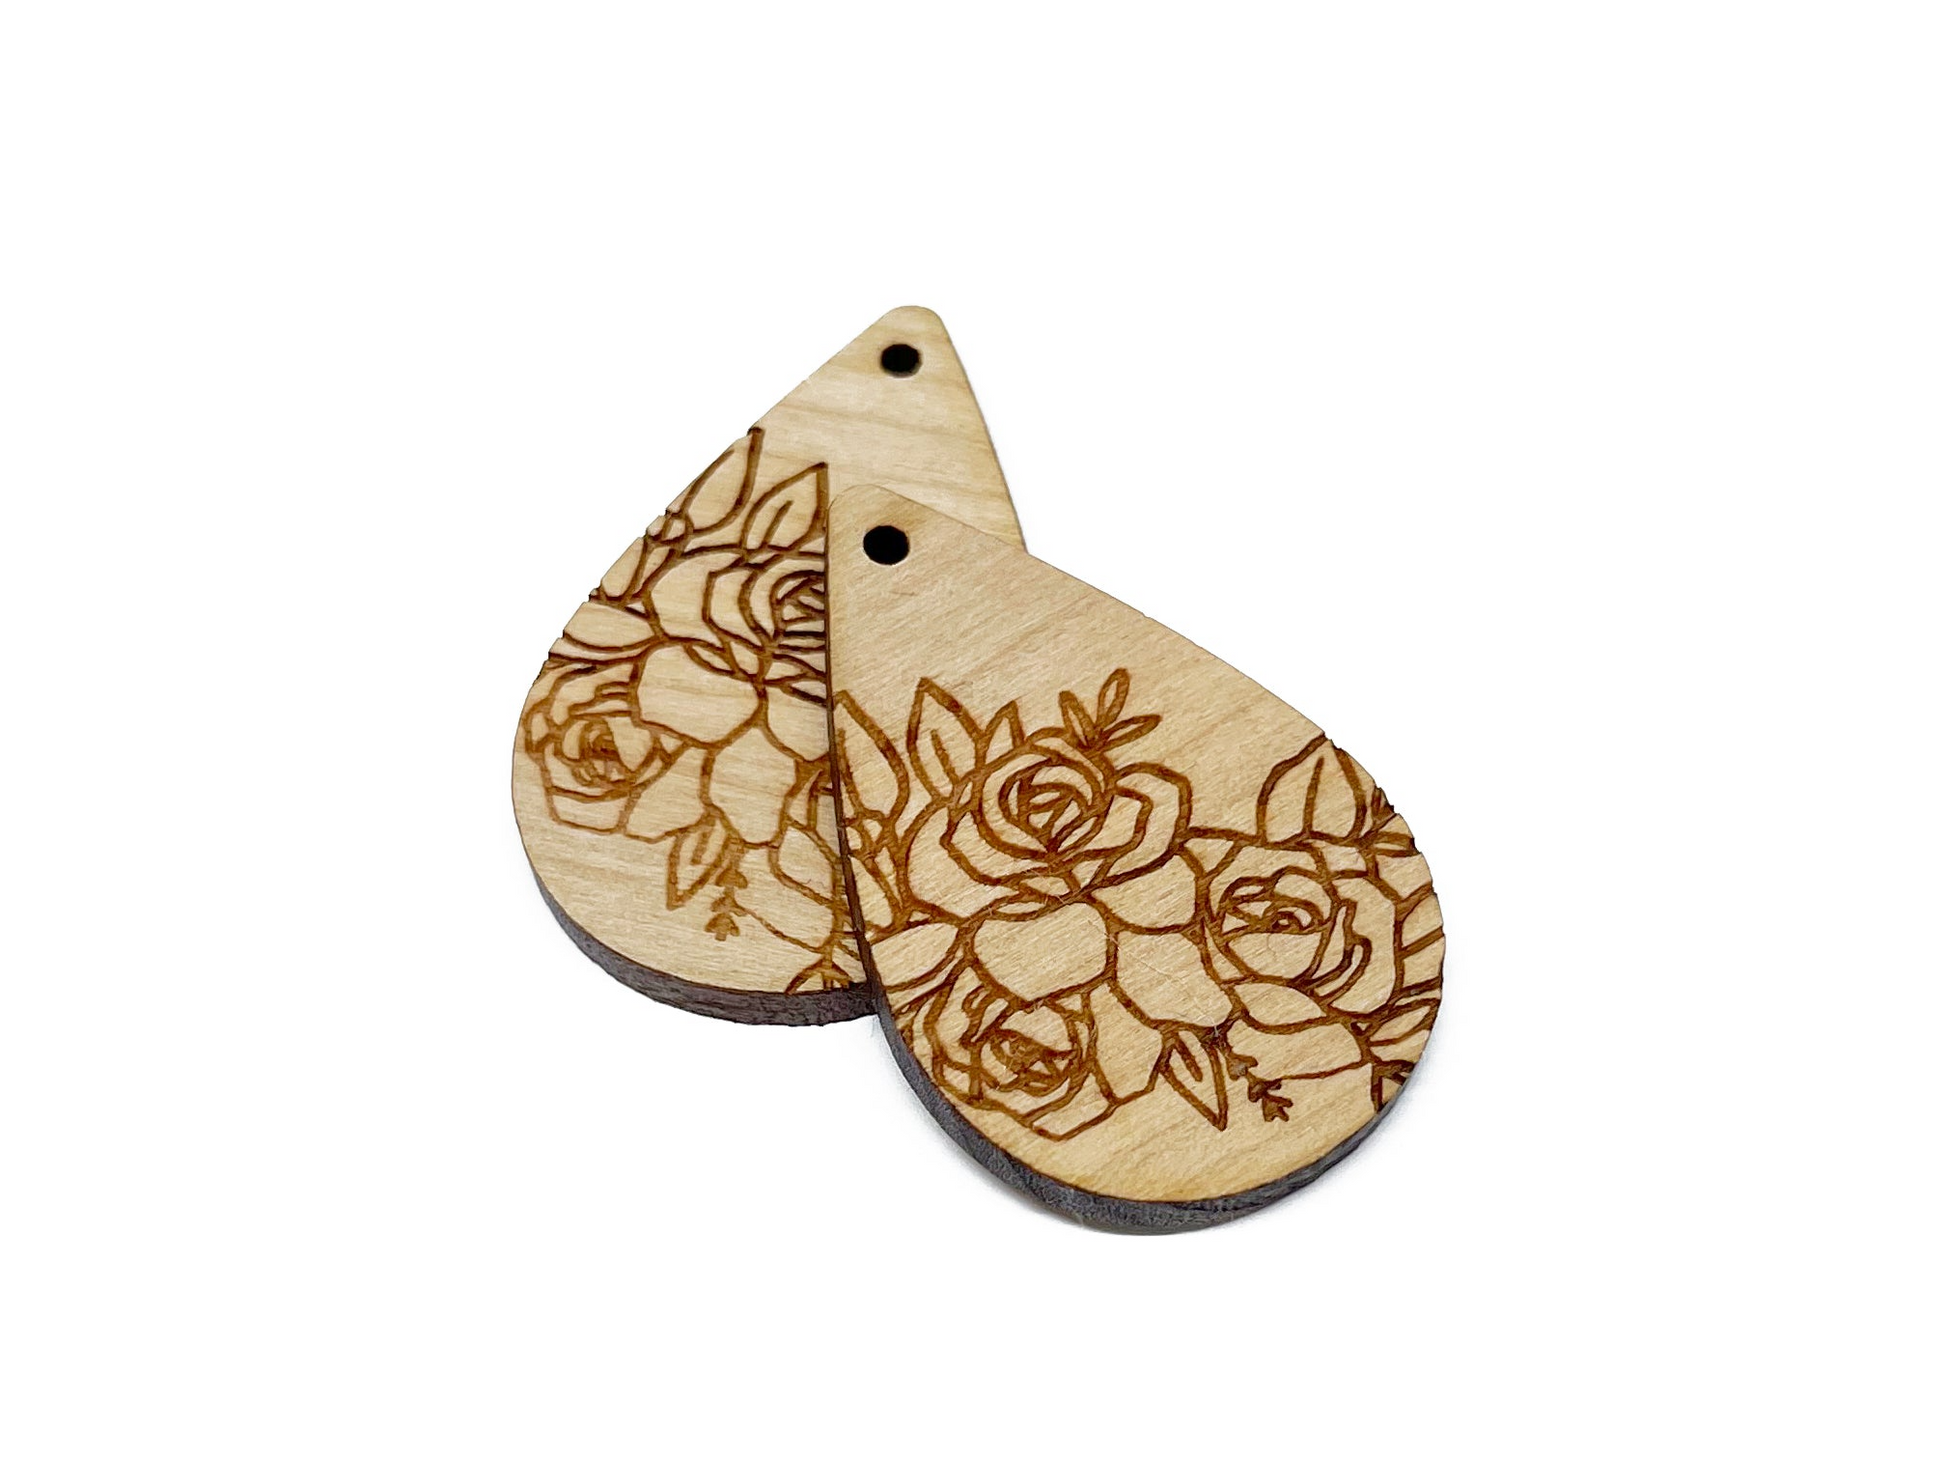 a pair of wooden earrings with flowers on them